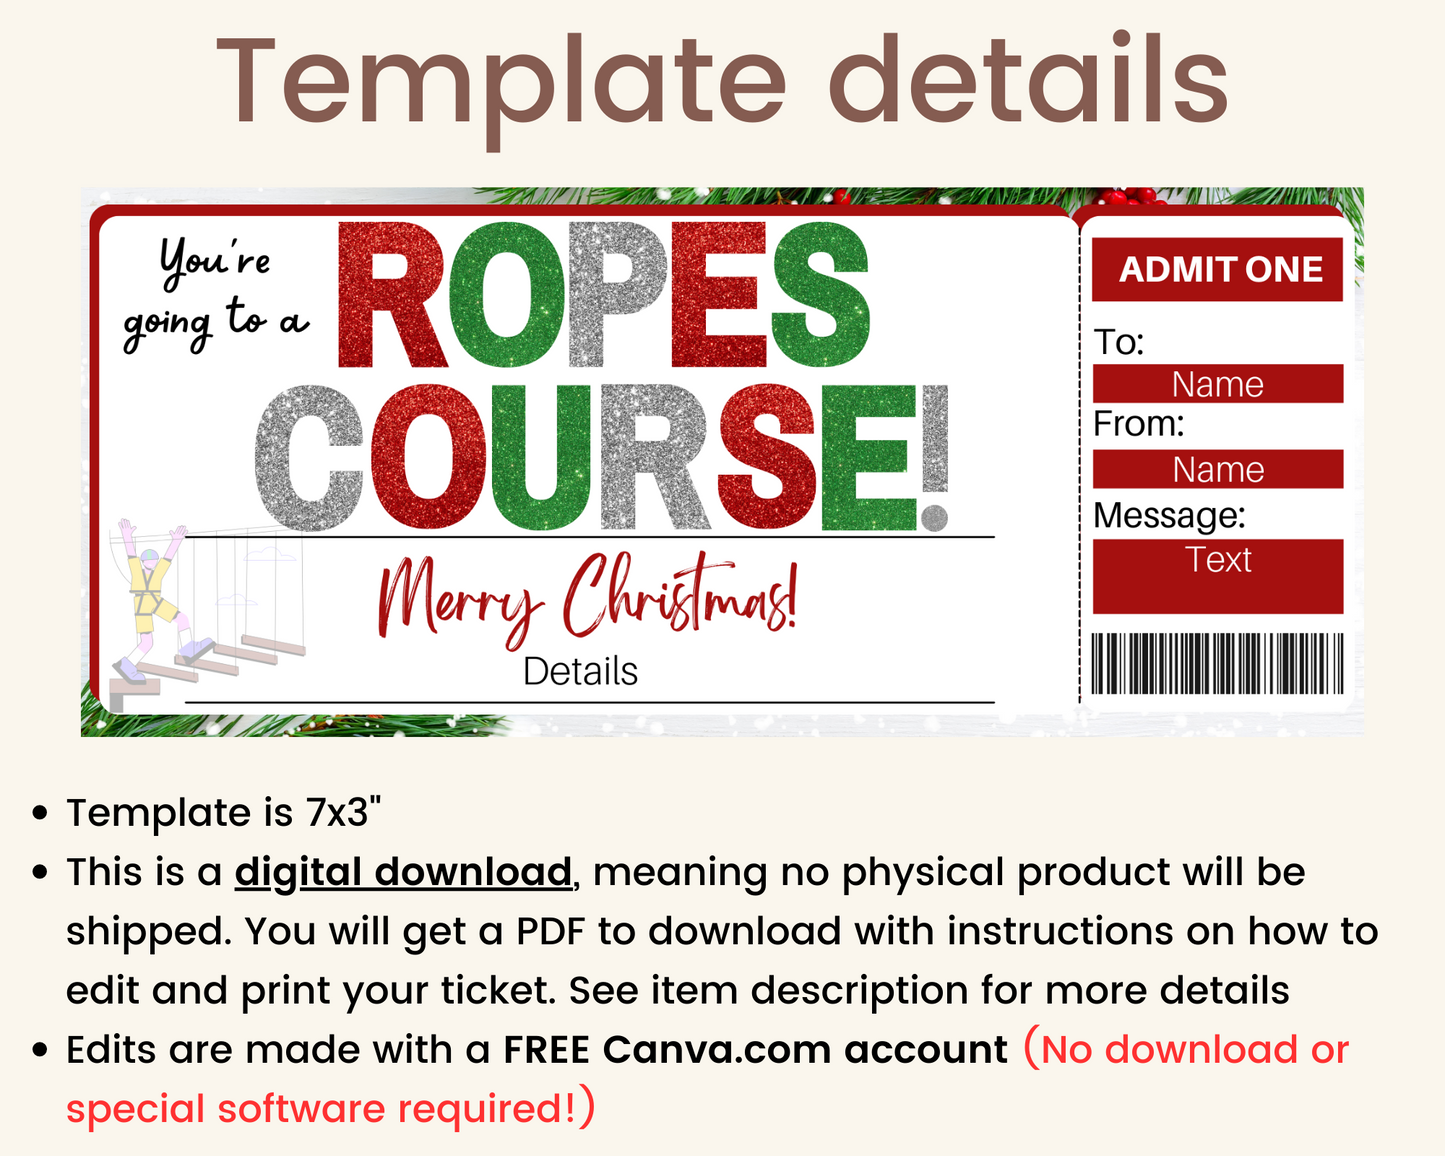 Christmas Ropes Course Gift Ticket Template